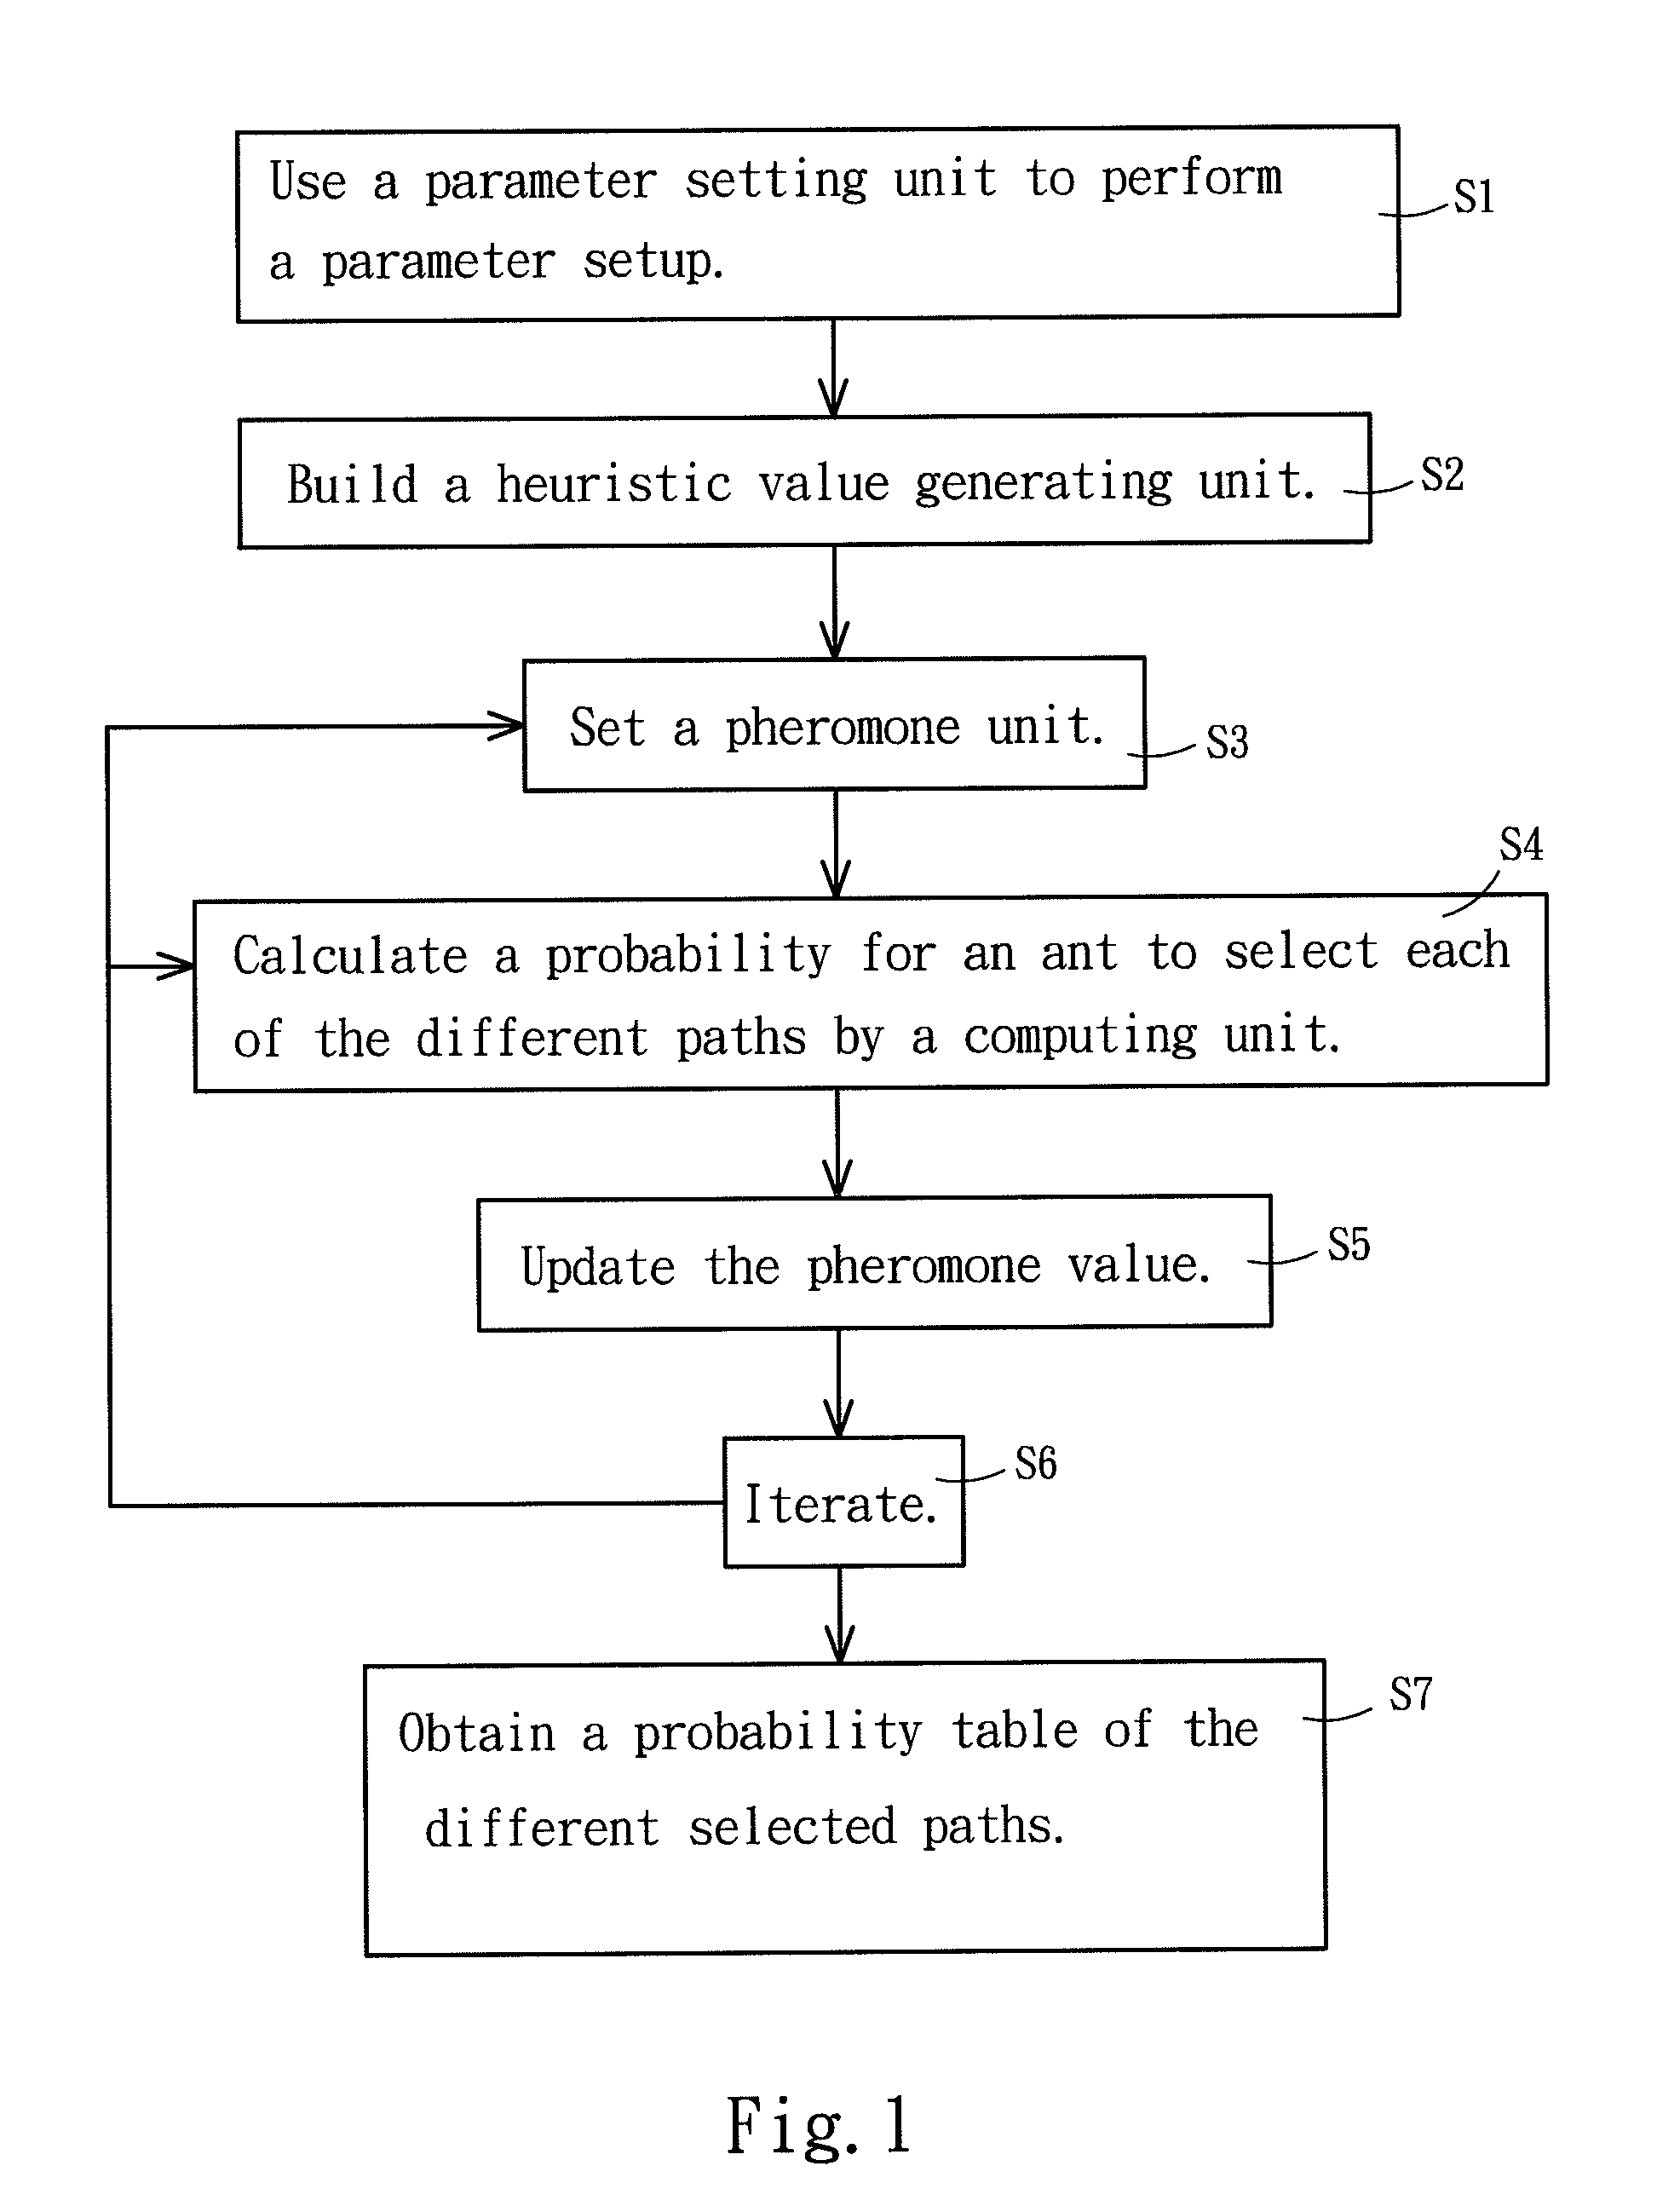 Peak-to-average power ratio reduction method for orthogonal frequency division multiplexing systems based on path finding